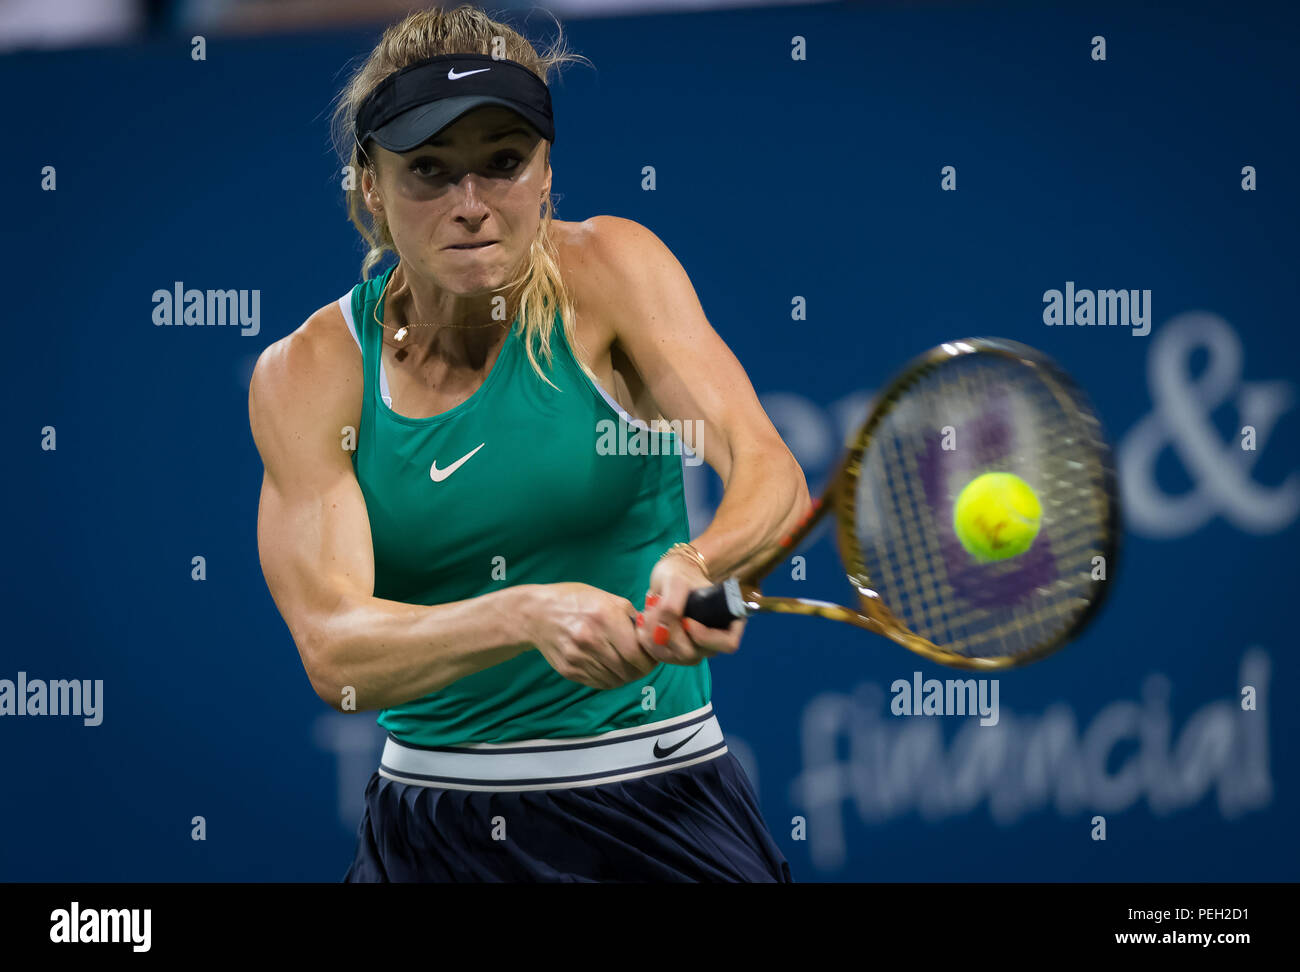 Cincinnati, OH, USA. August 14, 2018 - Elina Svitolina of the Ukraine in  action during her second-round match at the 2018 Western & Southern Open WTA  Premier 5 tennis tournament. Cincinnati, Ohio,